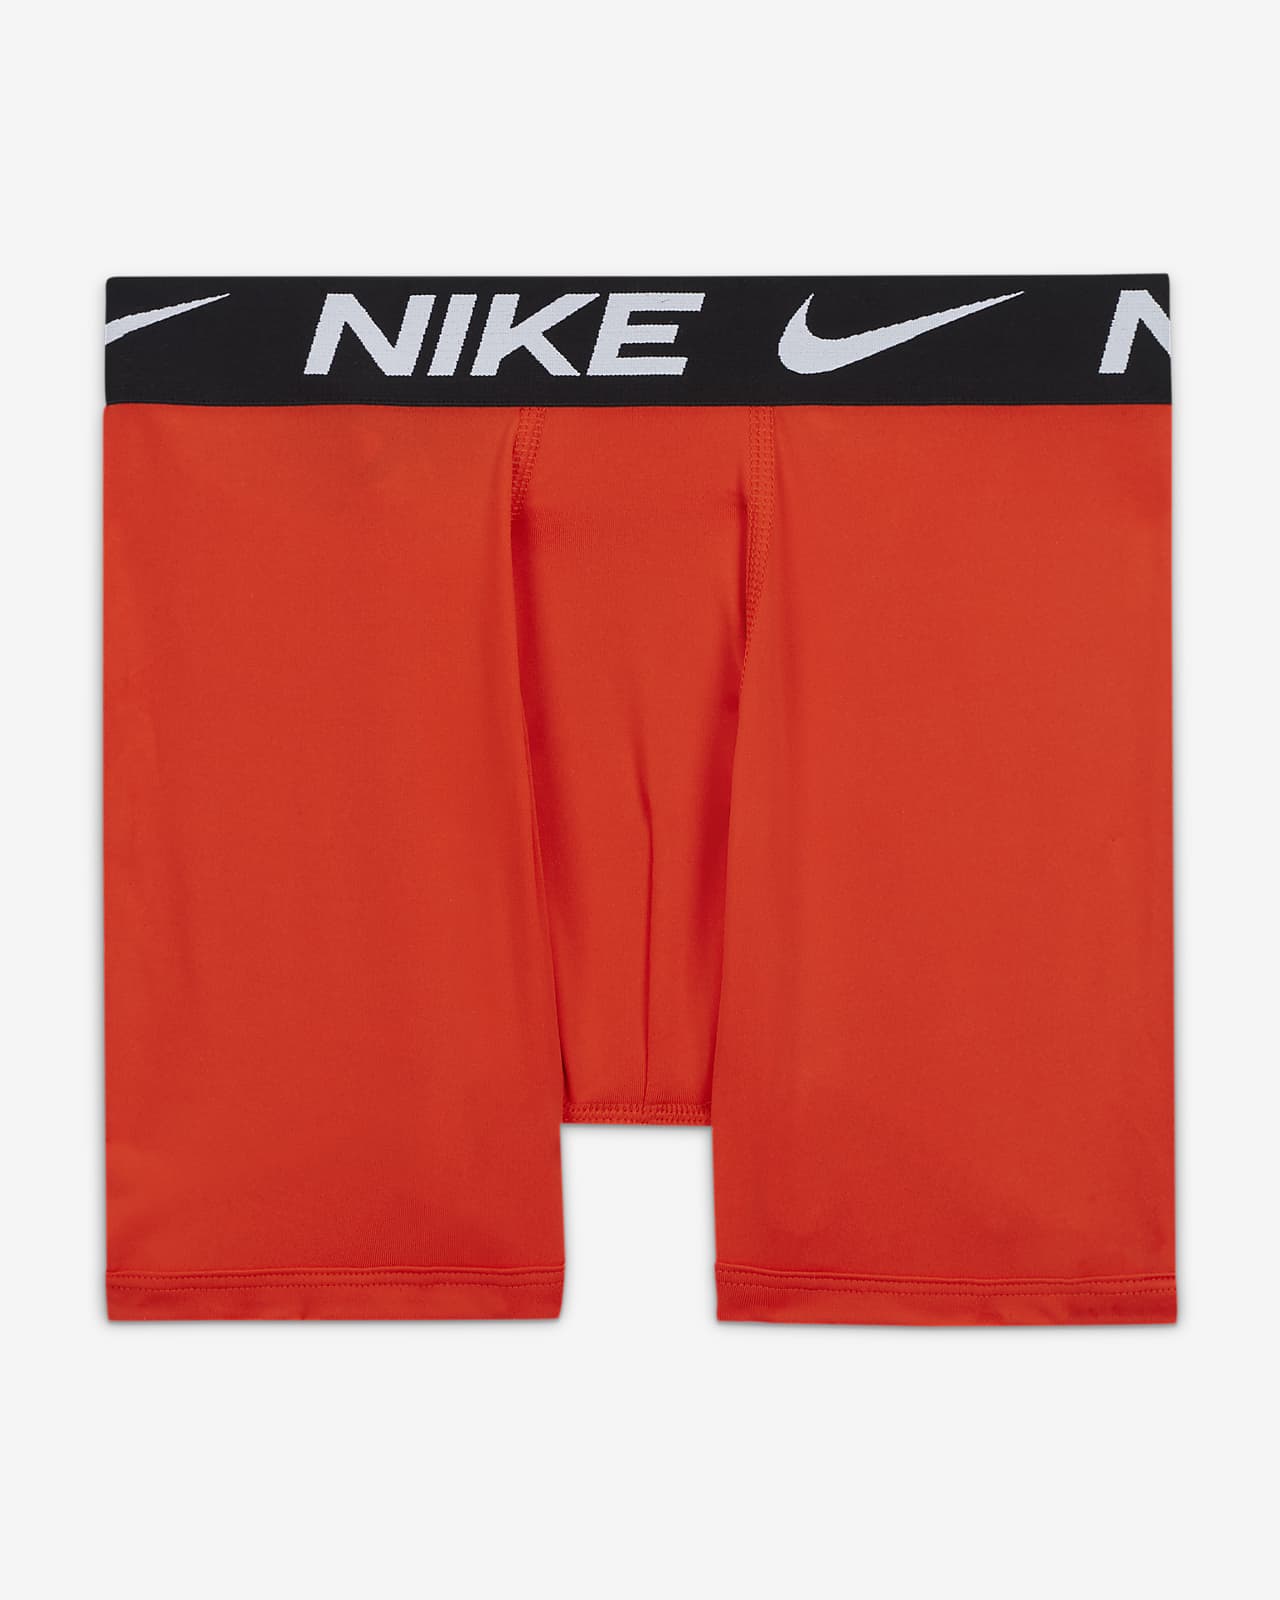 https://static.nike.com/a/images/t_PDP_1280_v1/f_auto,q_auto:eco/2df9c9ce-758e-457d-aaef-b4f7fd4e95ab/micro-print-boxer-briefs-3-pack-big-kids-underwear-ZZvbPS.png